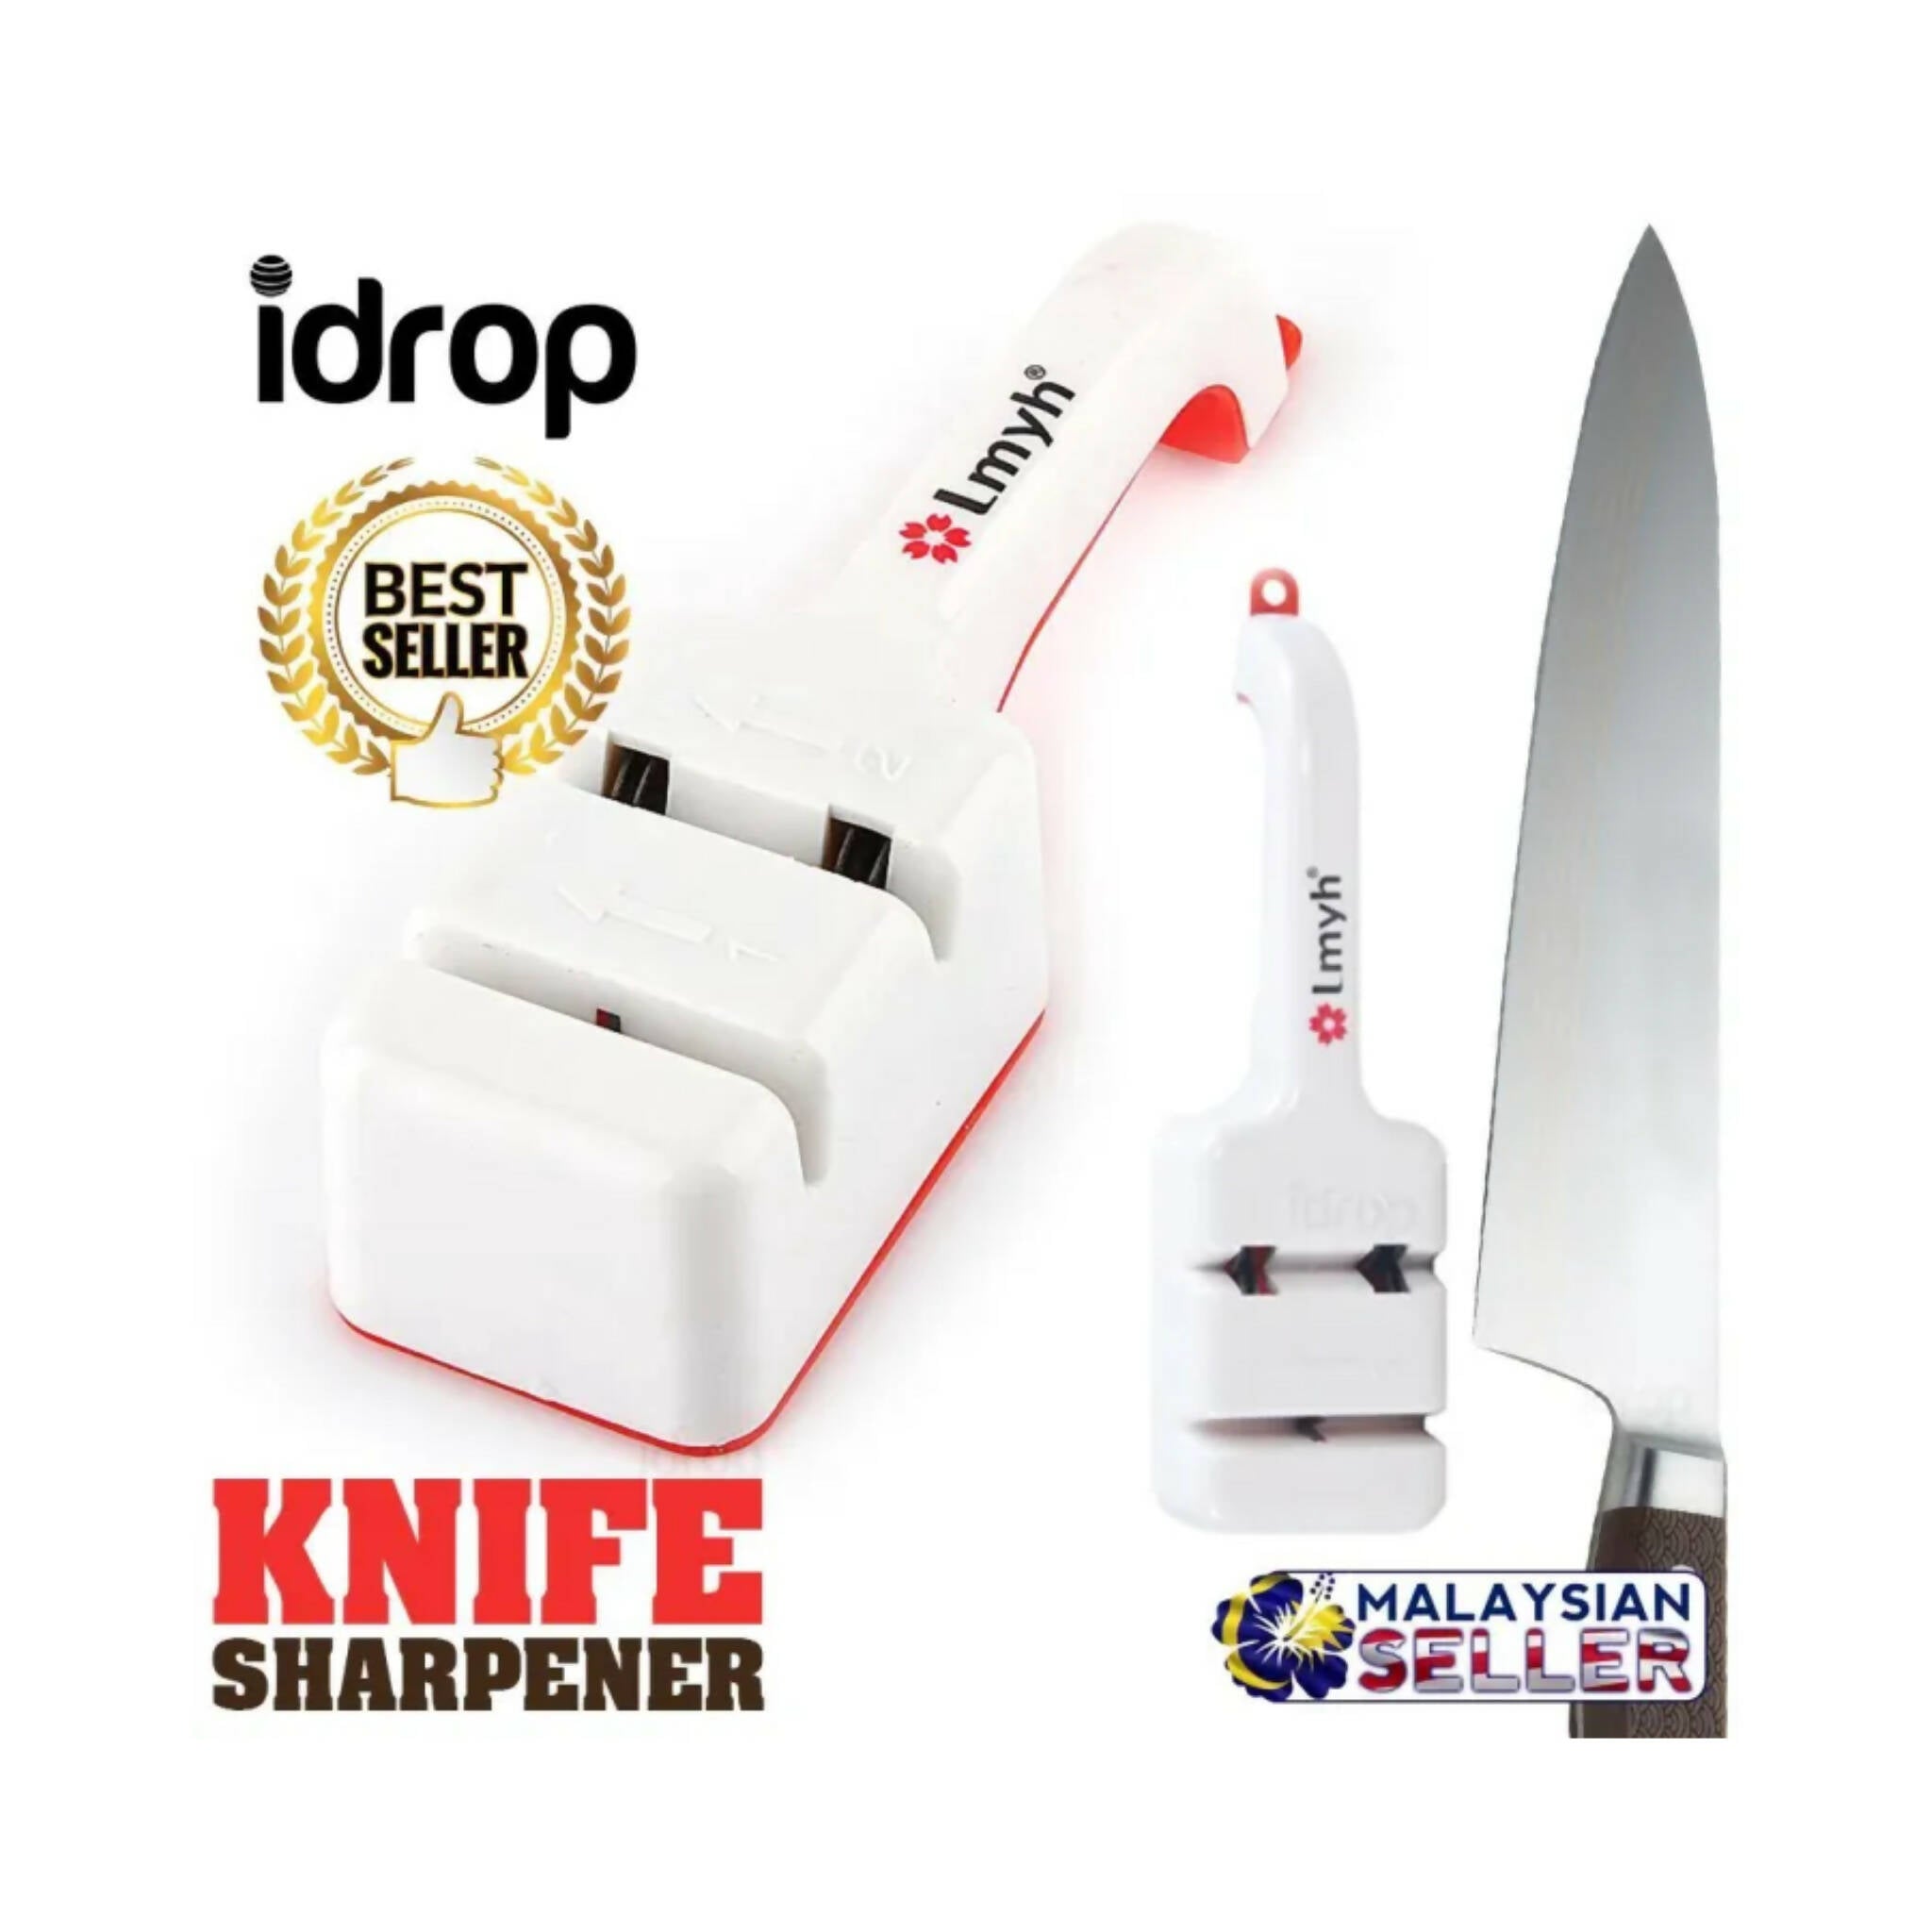 Knife Sharpener, LMYH Best DIY Tool, for Perfectly Sharp Knives